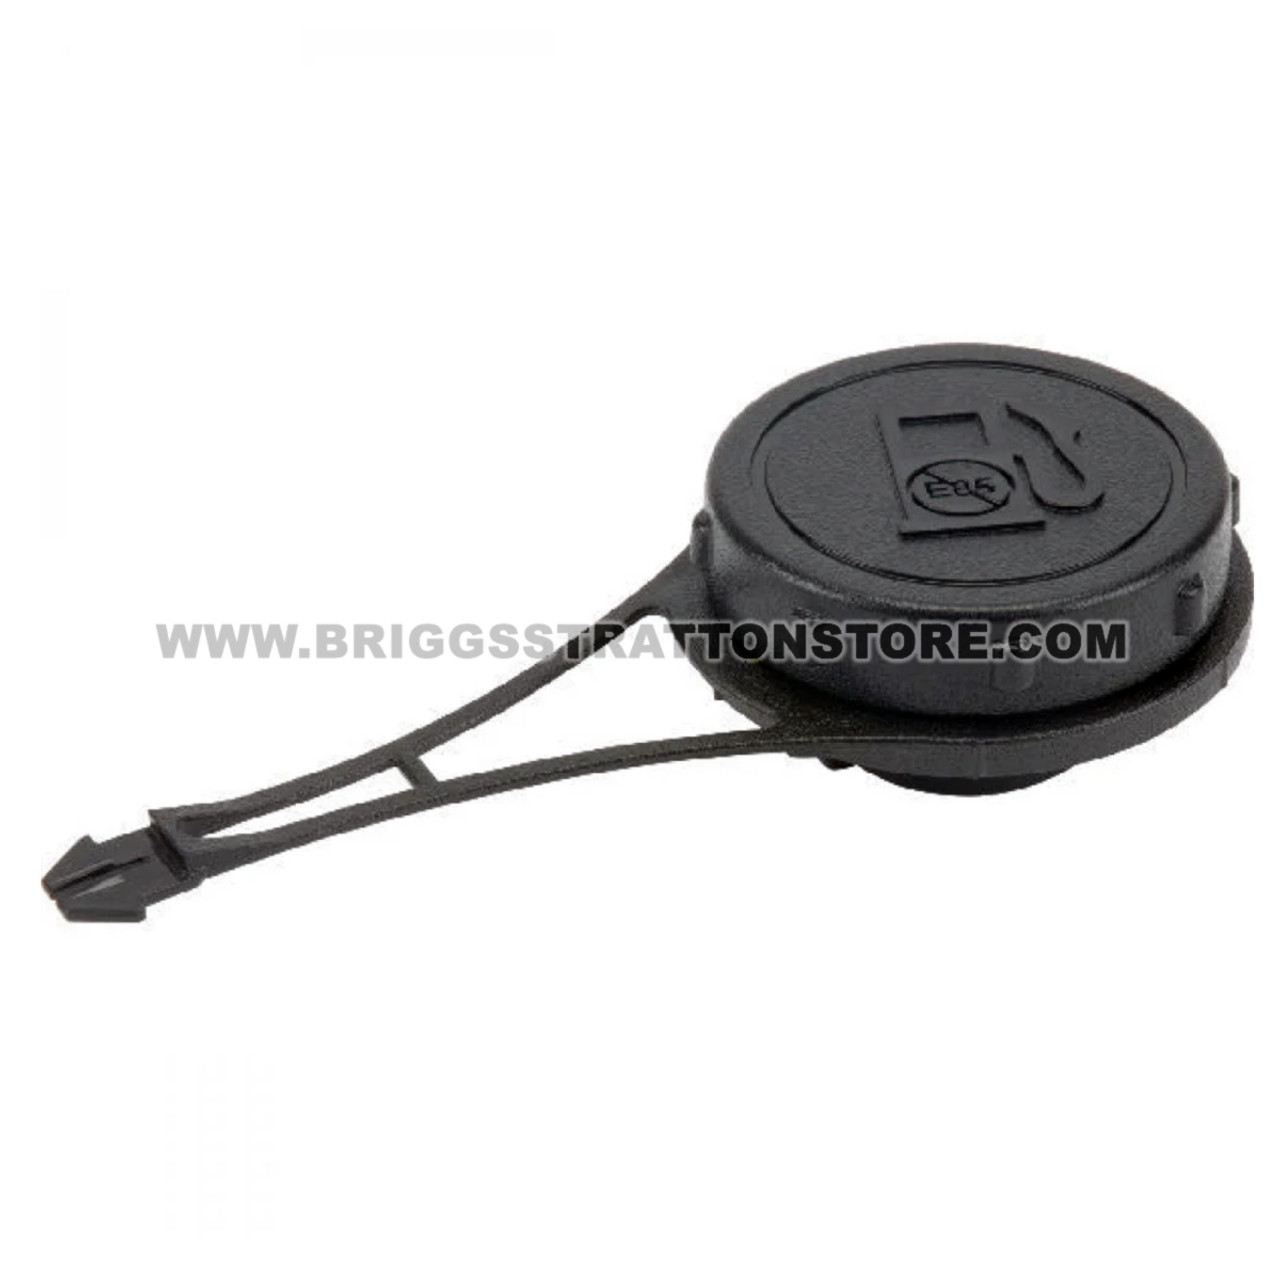 New Fits For BRIGGS & STRATTON Fuel Cap Replaces 799585 799684 US